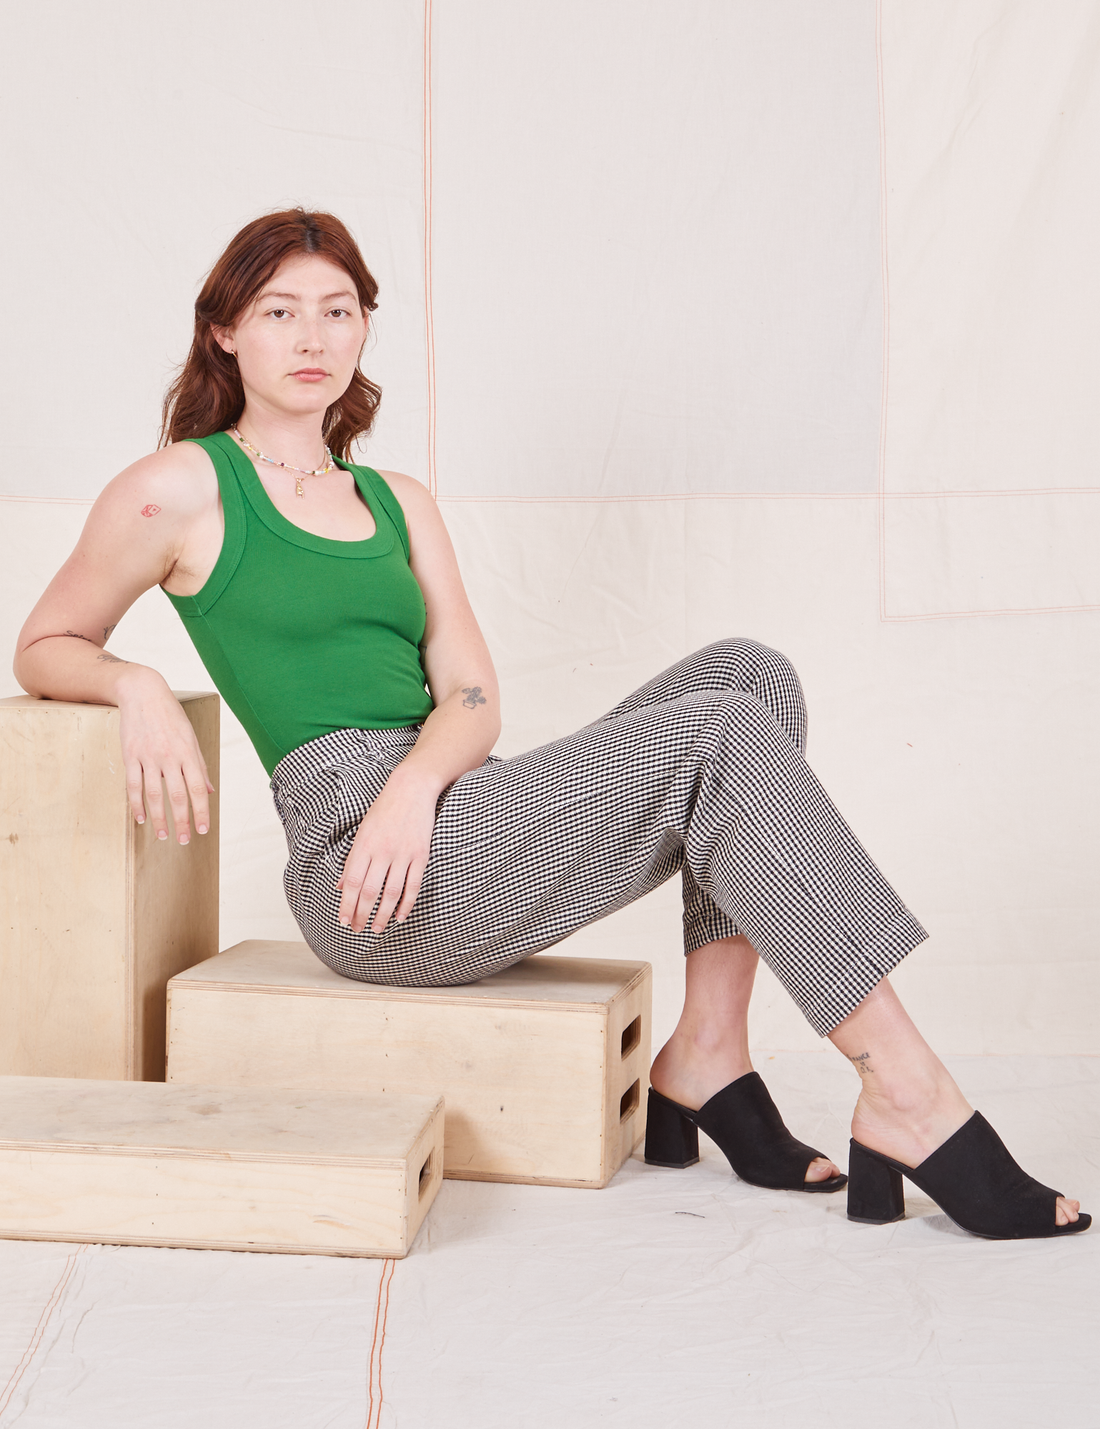 Alex is sitting on a wooden crate wearing Checker Trousers in Black & White and forest green Tank Top